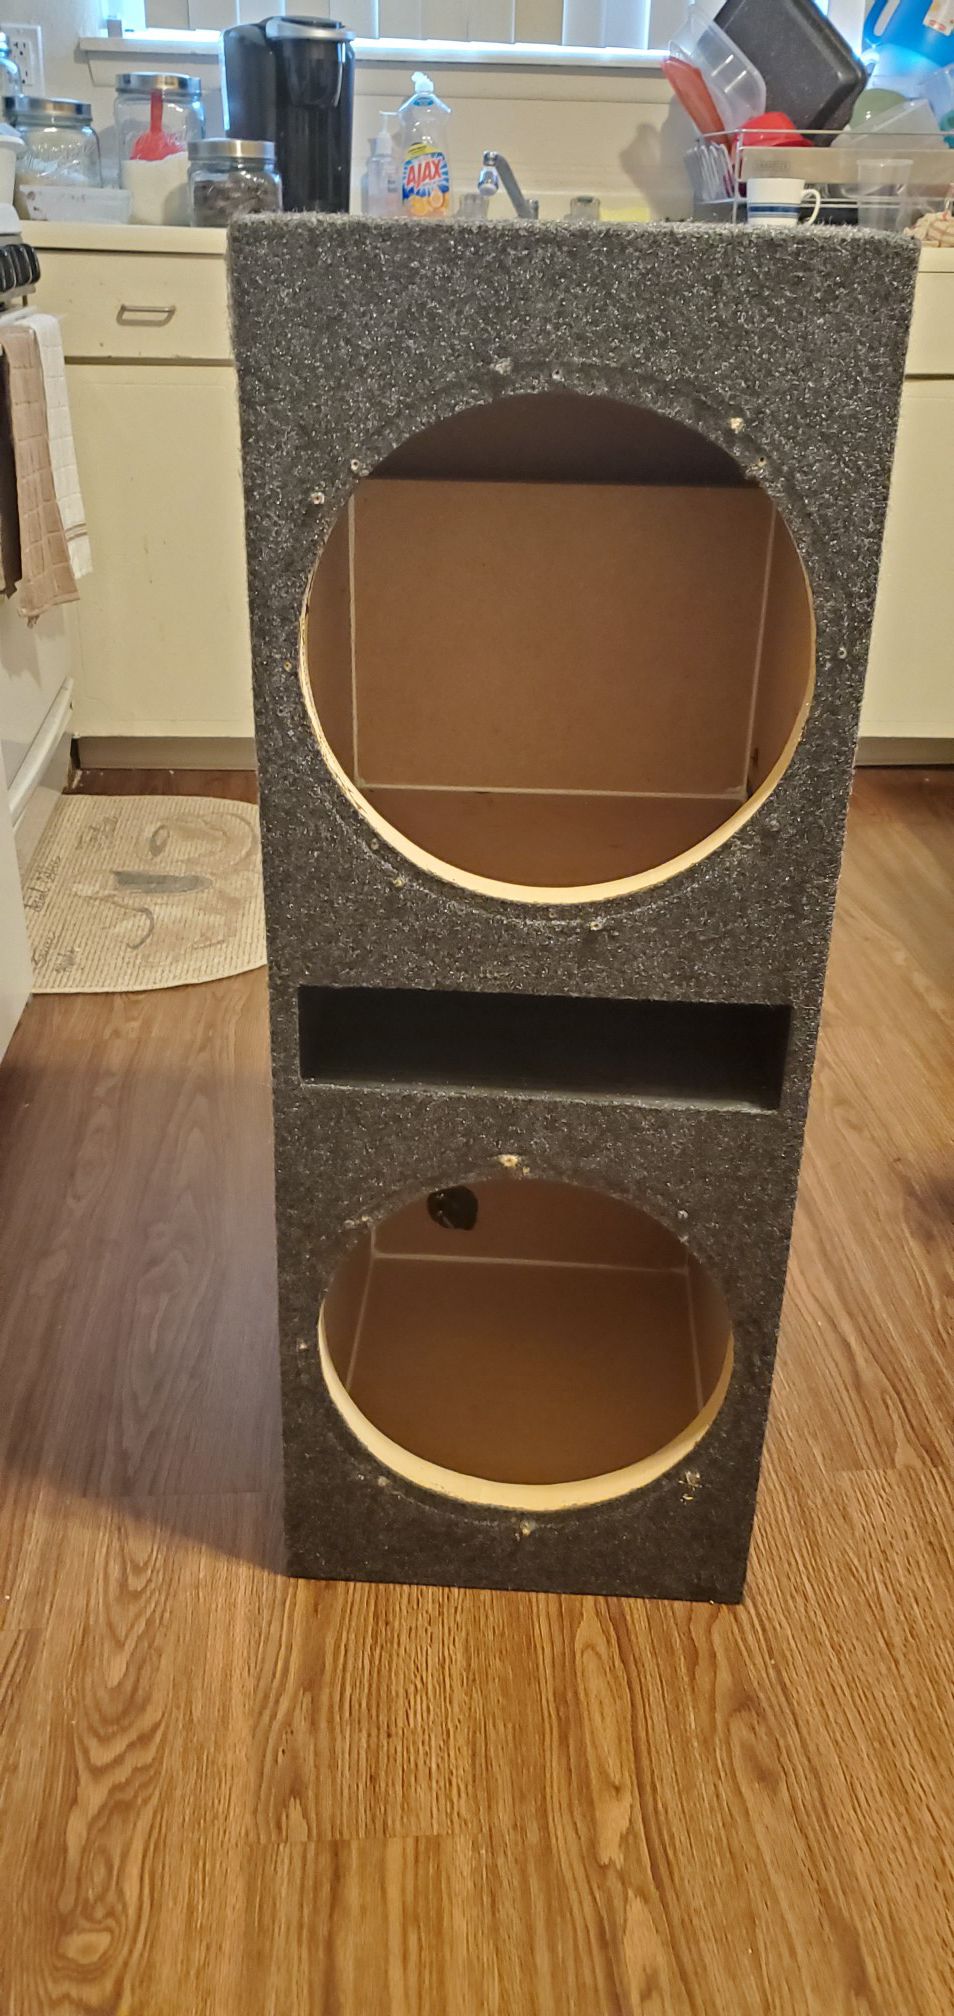 Dual 12 inch vented subwoofer box